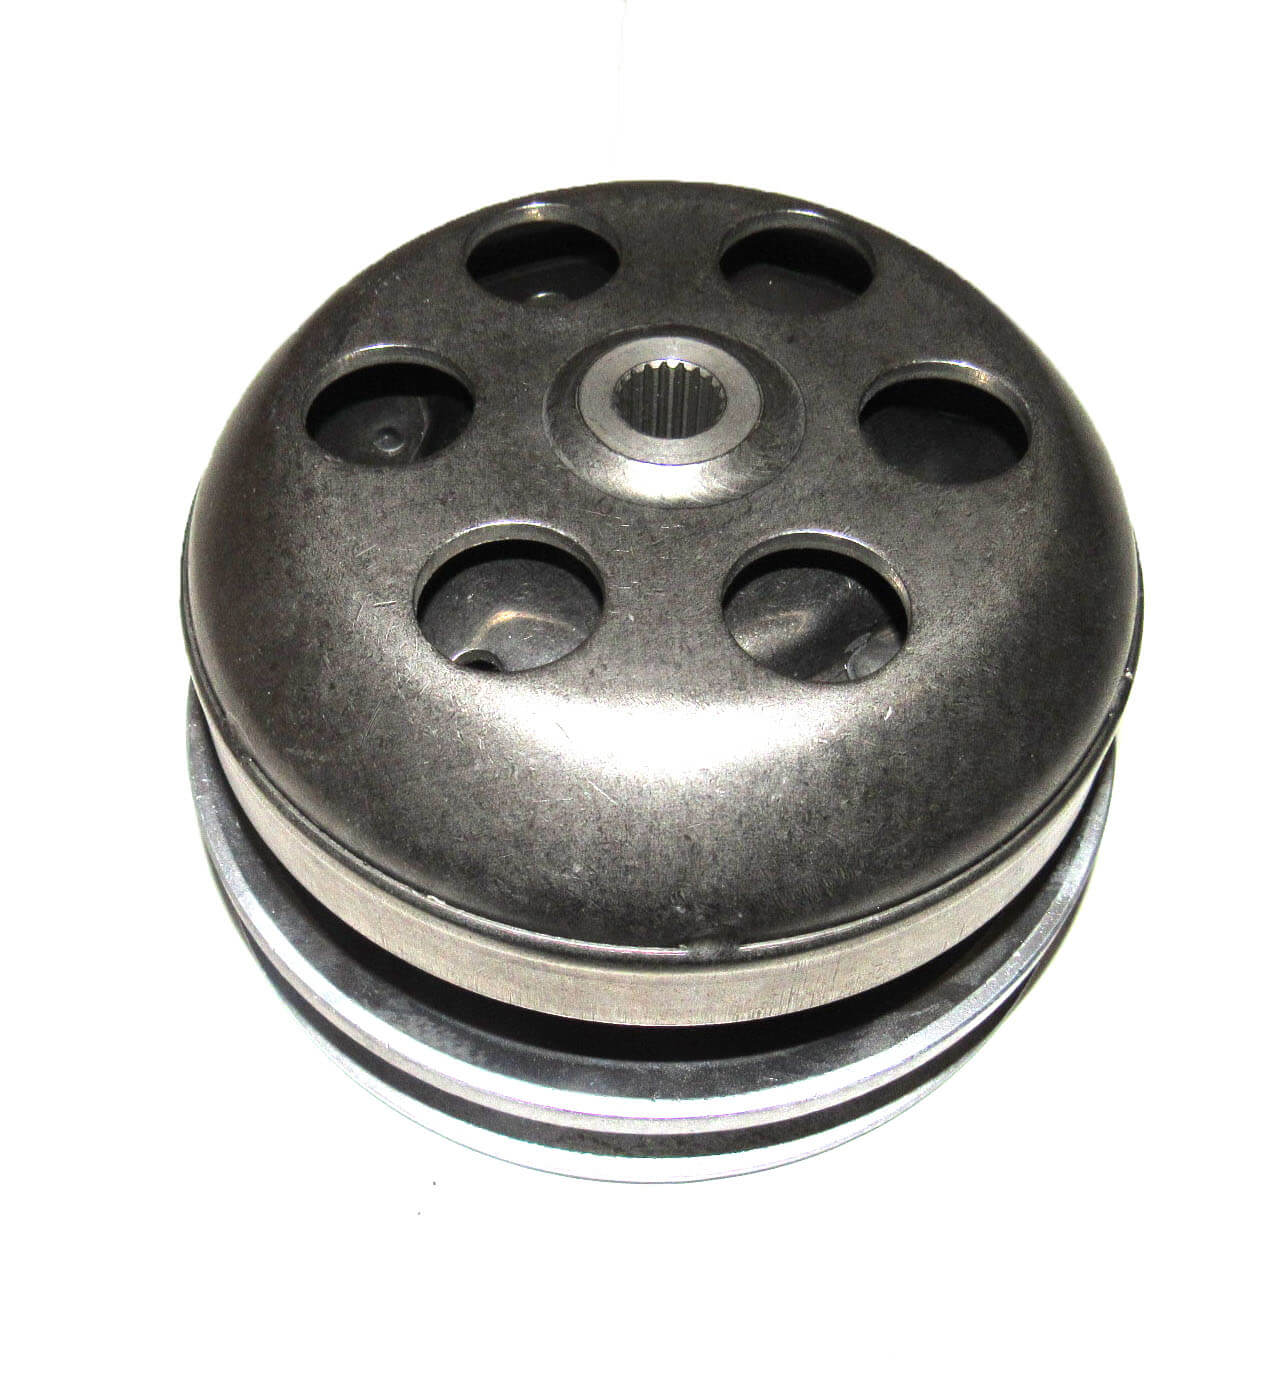 Rear Drive Clutch-Driven Pulley Fits Most 250-300cc GY6 Chinese ATVs, GoKarts, Scooters, UTVs Bell ID=135 Shaft=15 Splines=19 - Click Image to Close